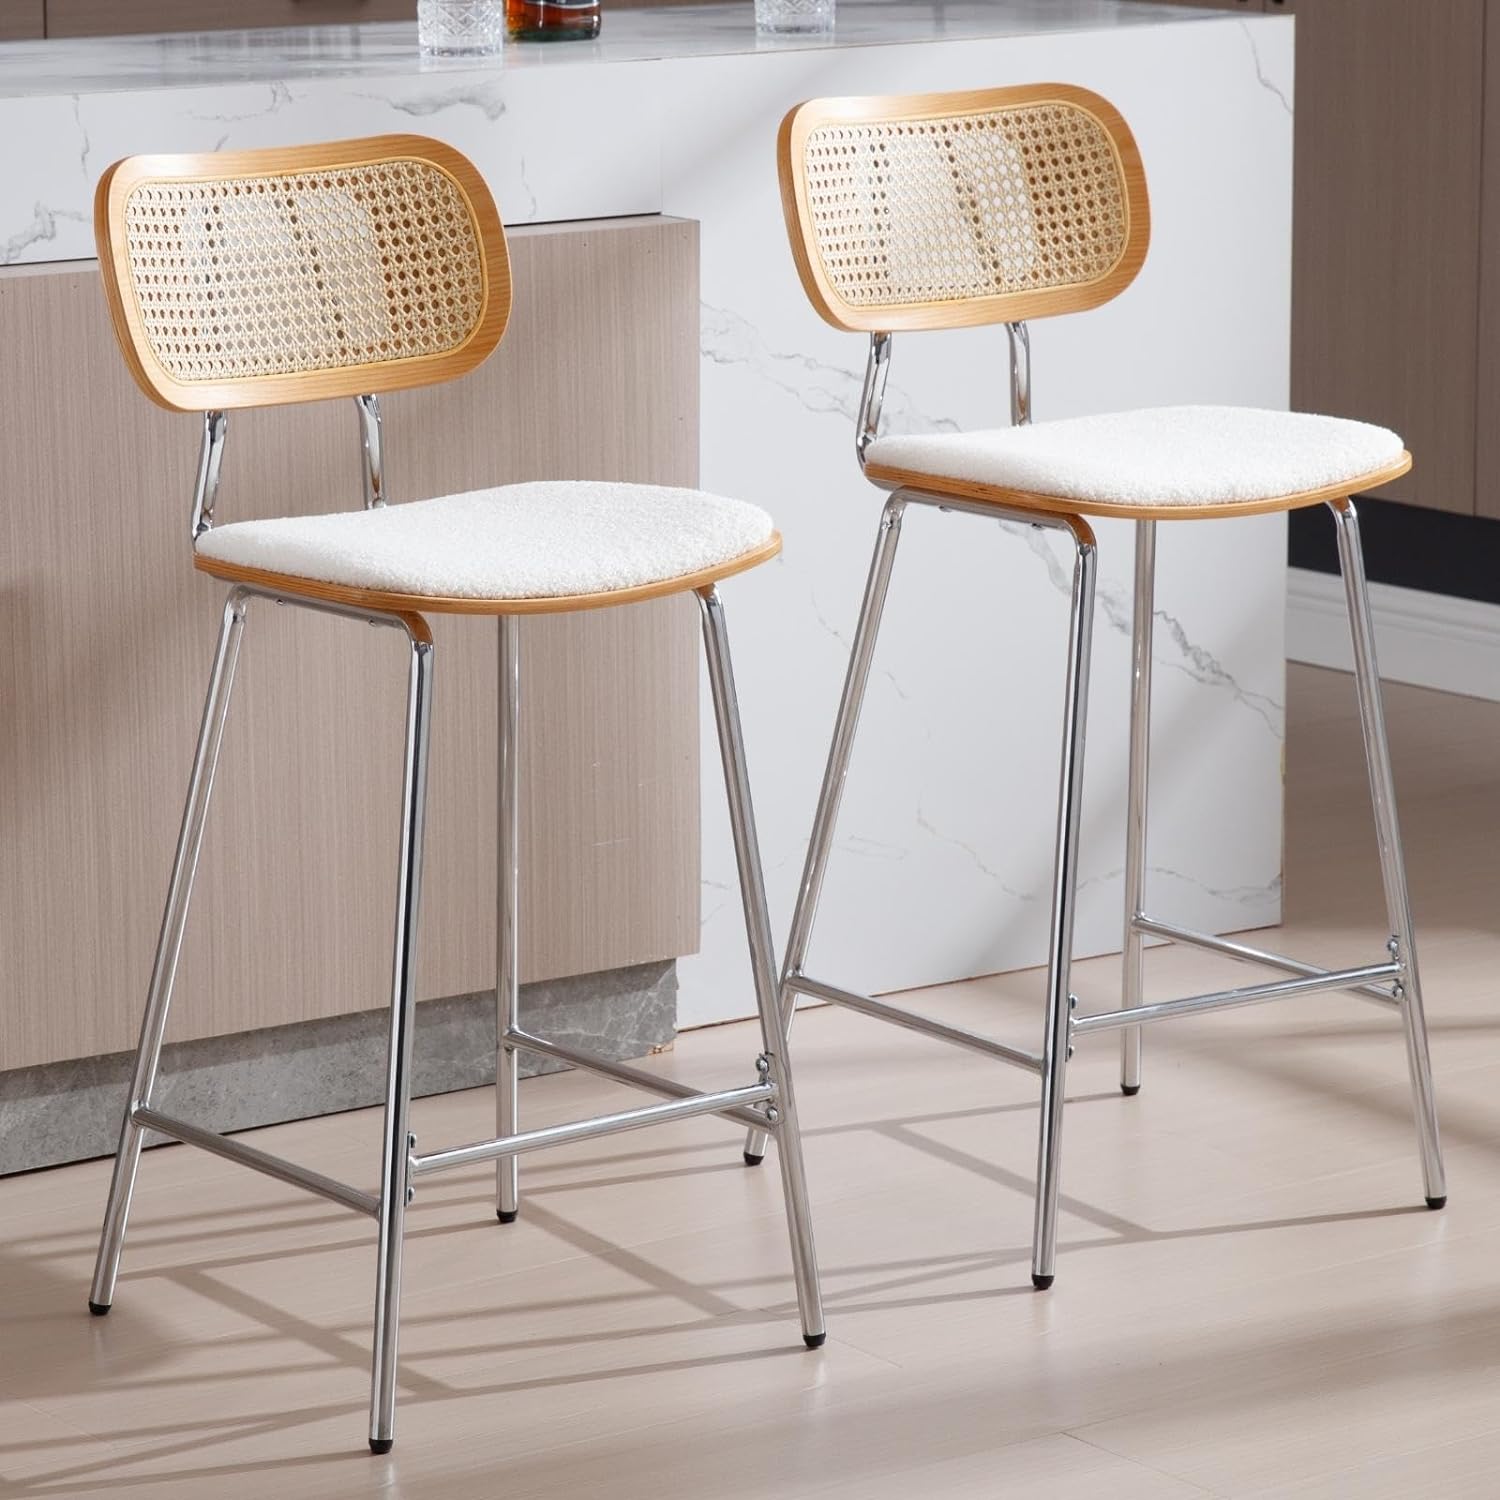 DUOMAY Modern Bar Stools Set of 2, 26 Counter Height Barstools with Rattan Back, Sherpa Upholstered Kitchen Island Chair with Silver Metal Legs for Home Bar Coffee Shop, White